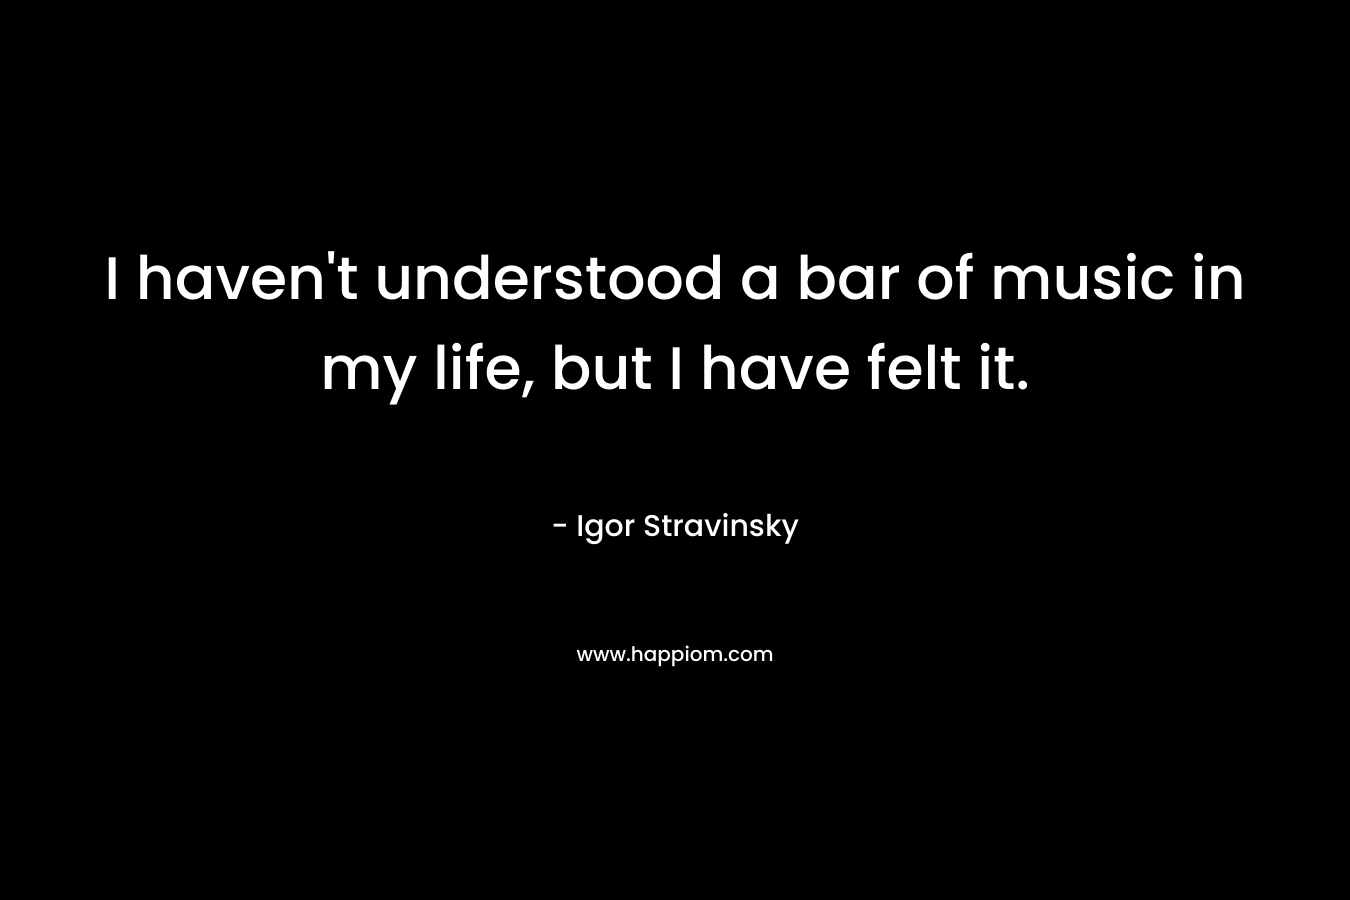 I haven’t understood a bar of music in my life, but I have felt it. – Igor Stravinsky